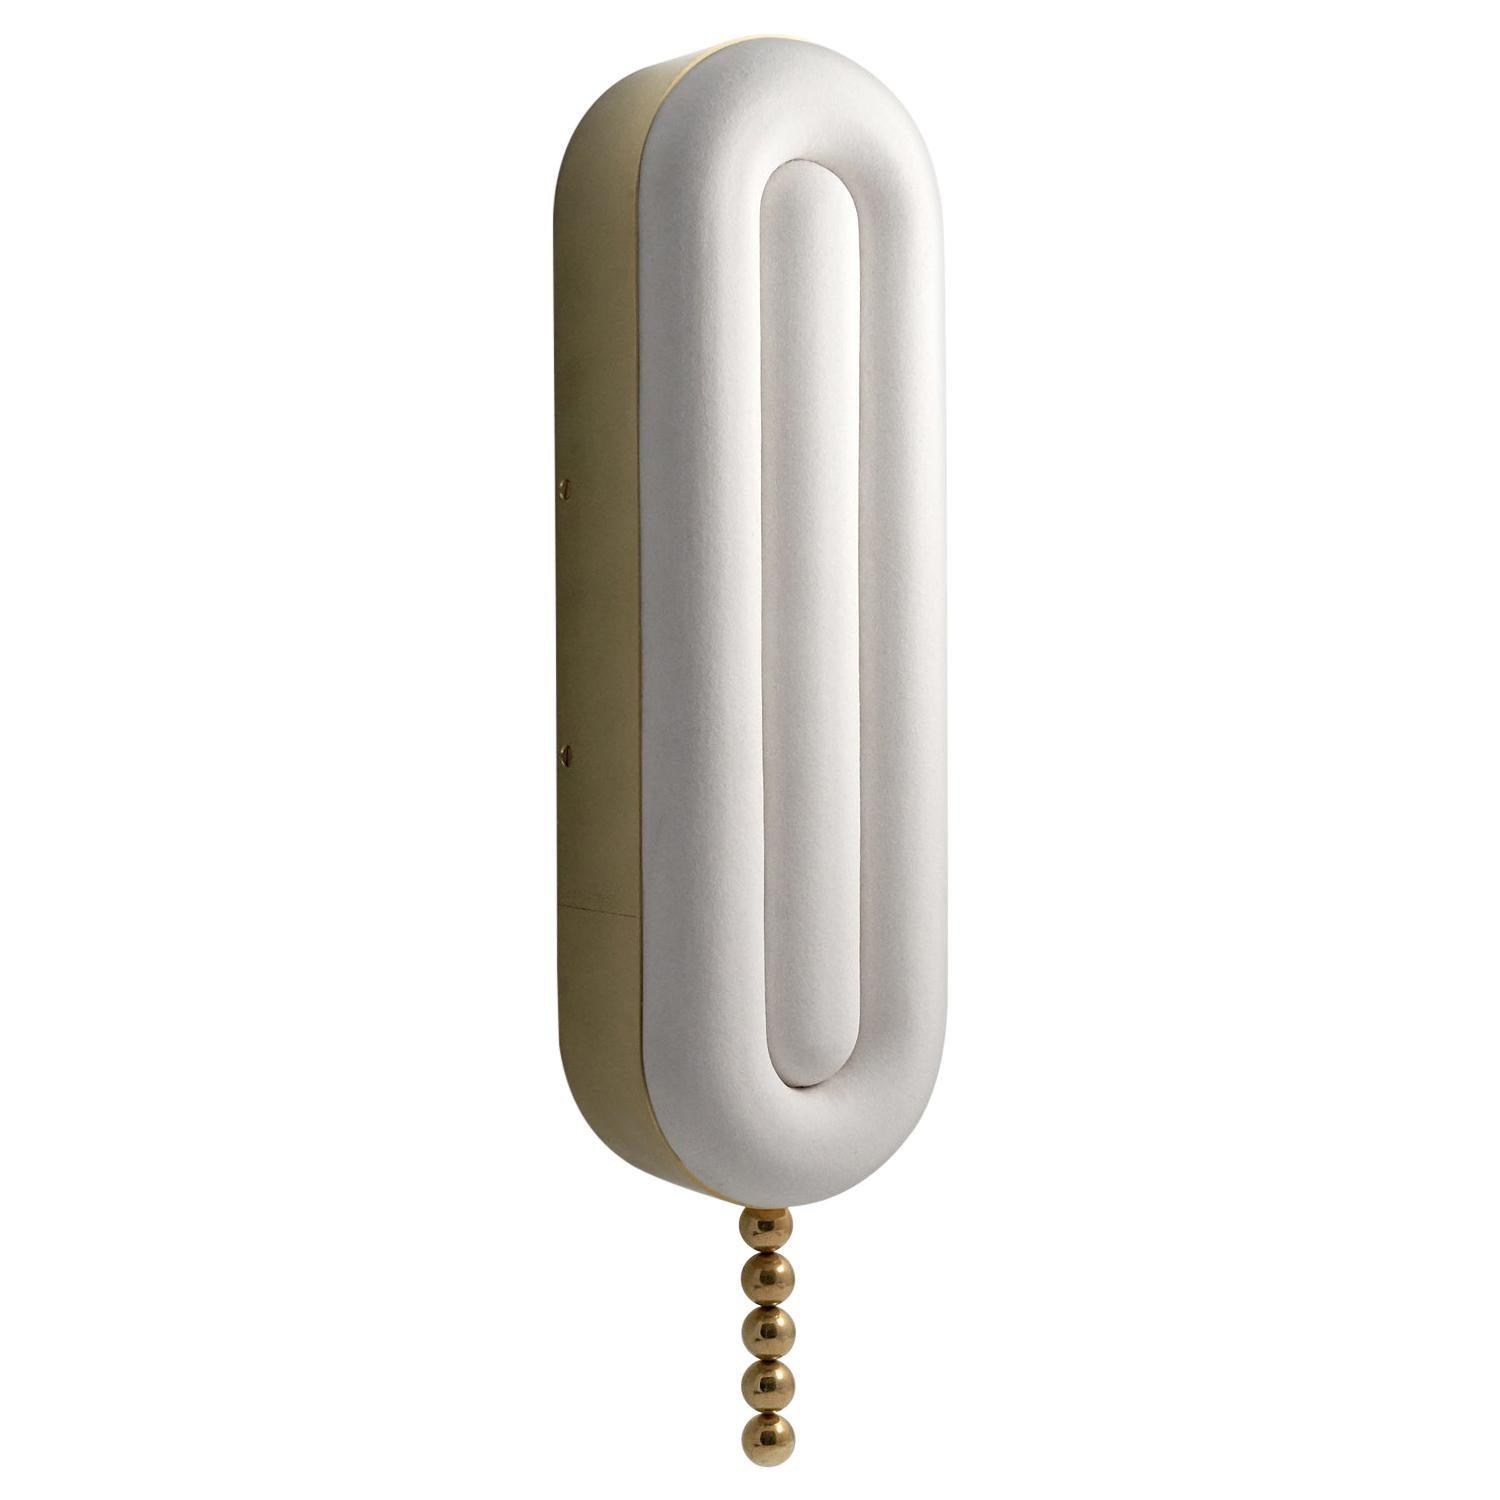 Nº159 Wall Lamp by Avoirdupois - A brass and porcelain sconce with pull chain For Sale